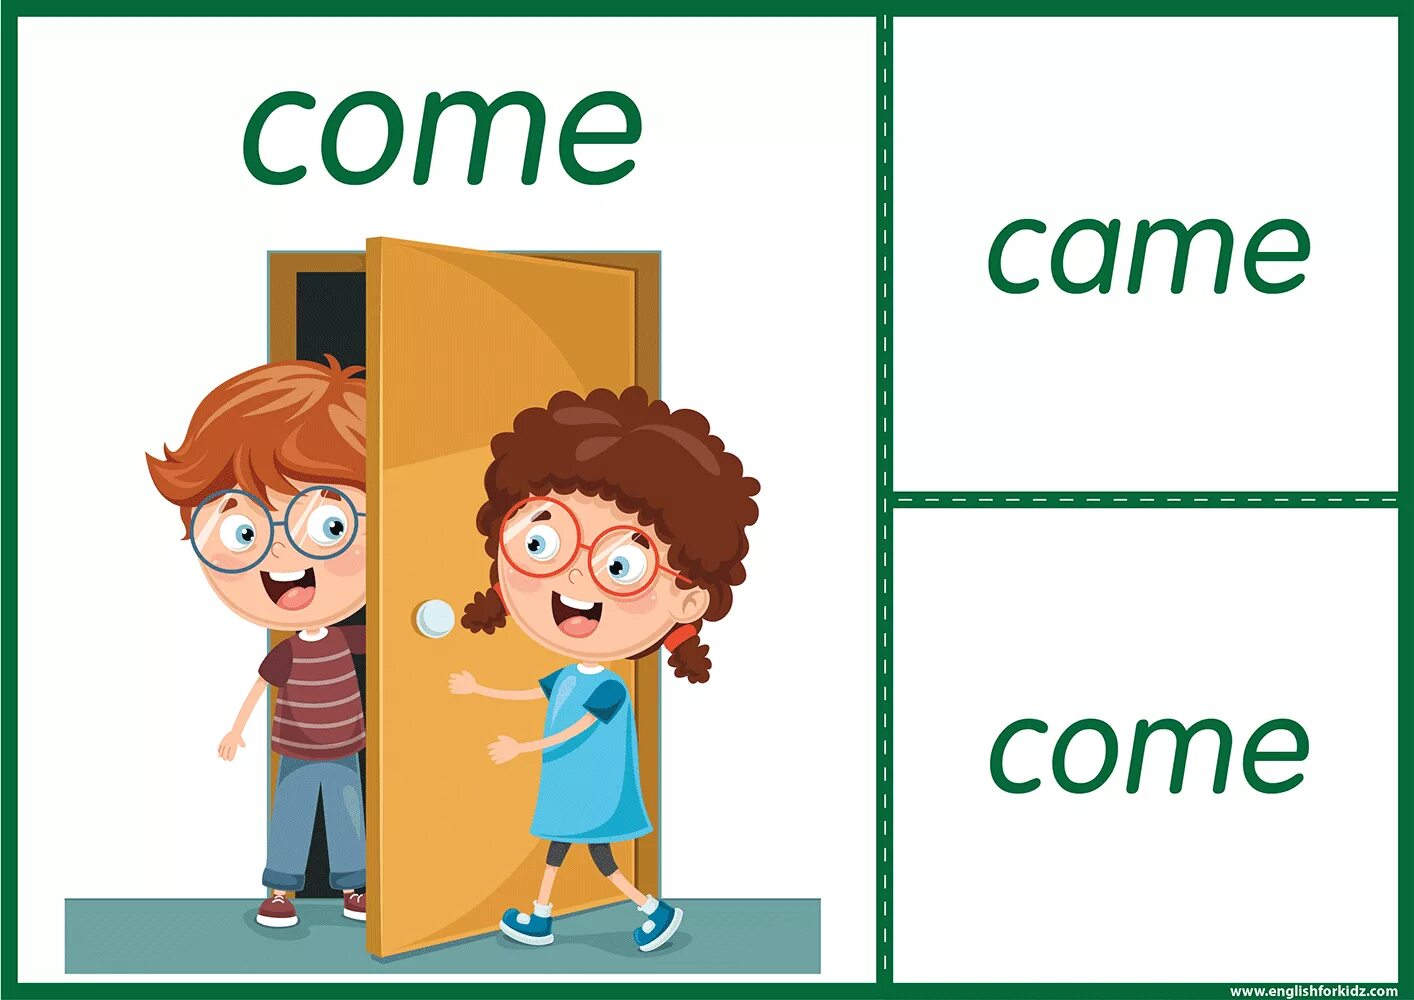 Come картинка для детей. Глаголы Flashcards. Flashcards картинки. Verbs Flashcards for Kids. Come coming compared